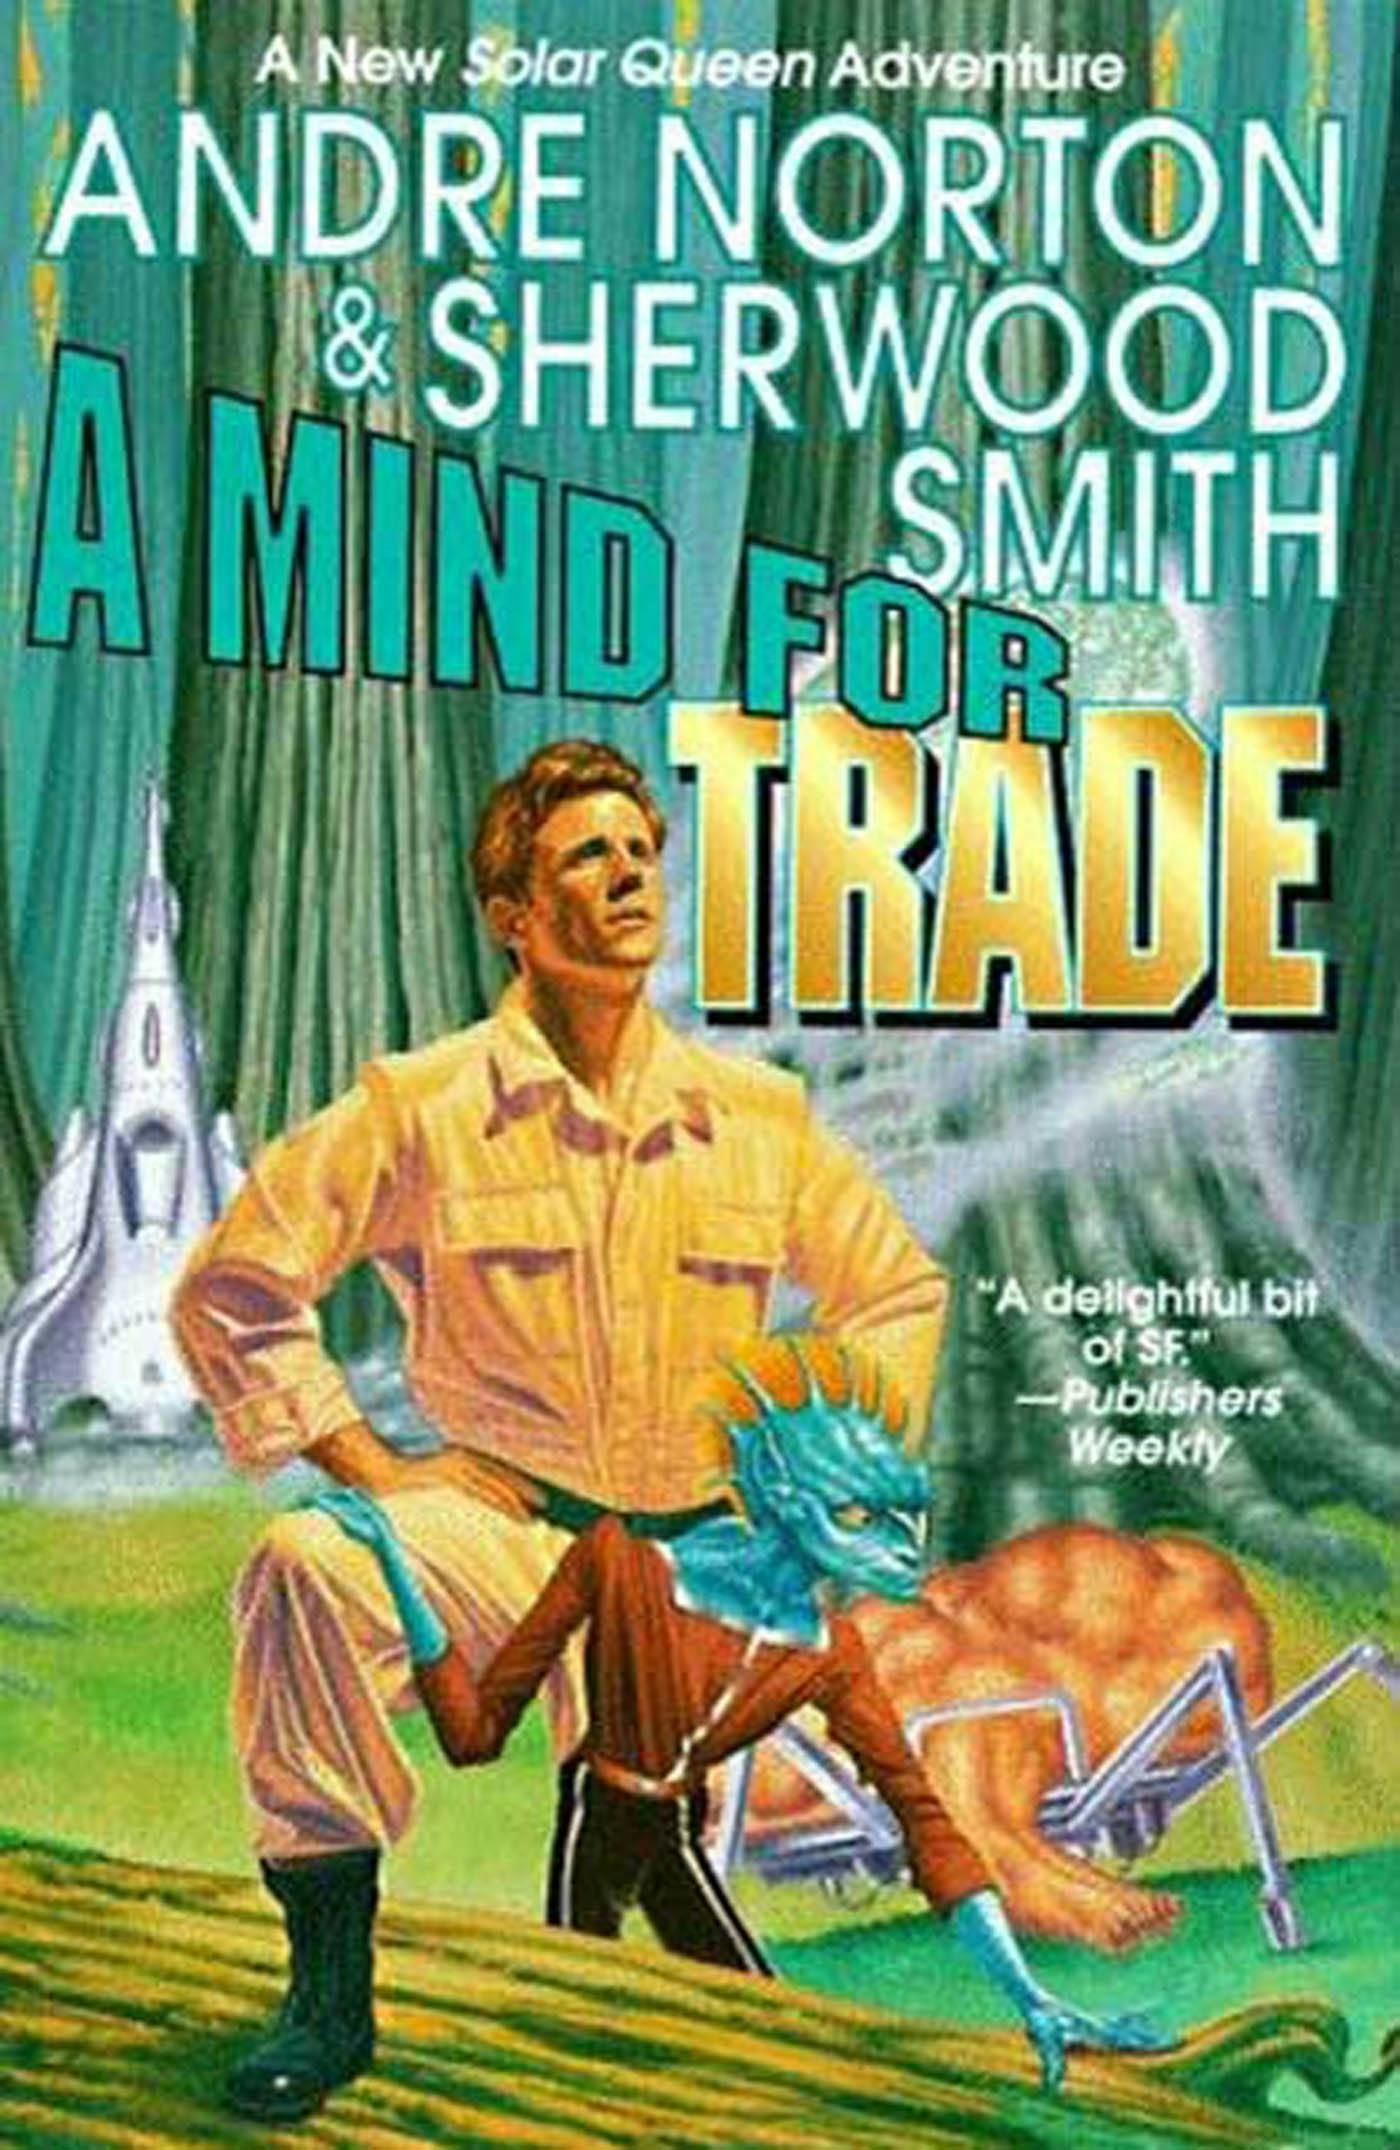 Cover for the book titled as: A Mind For Trade